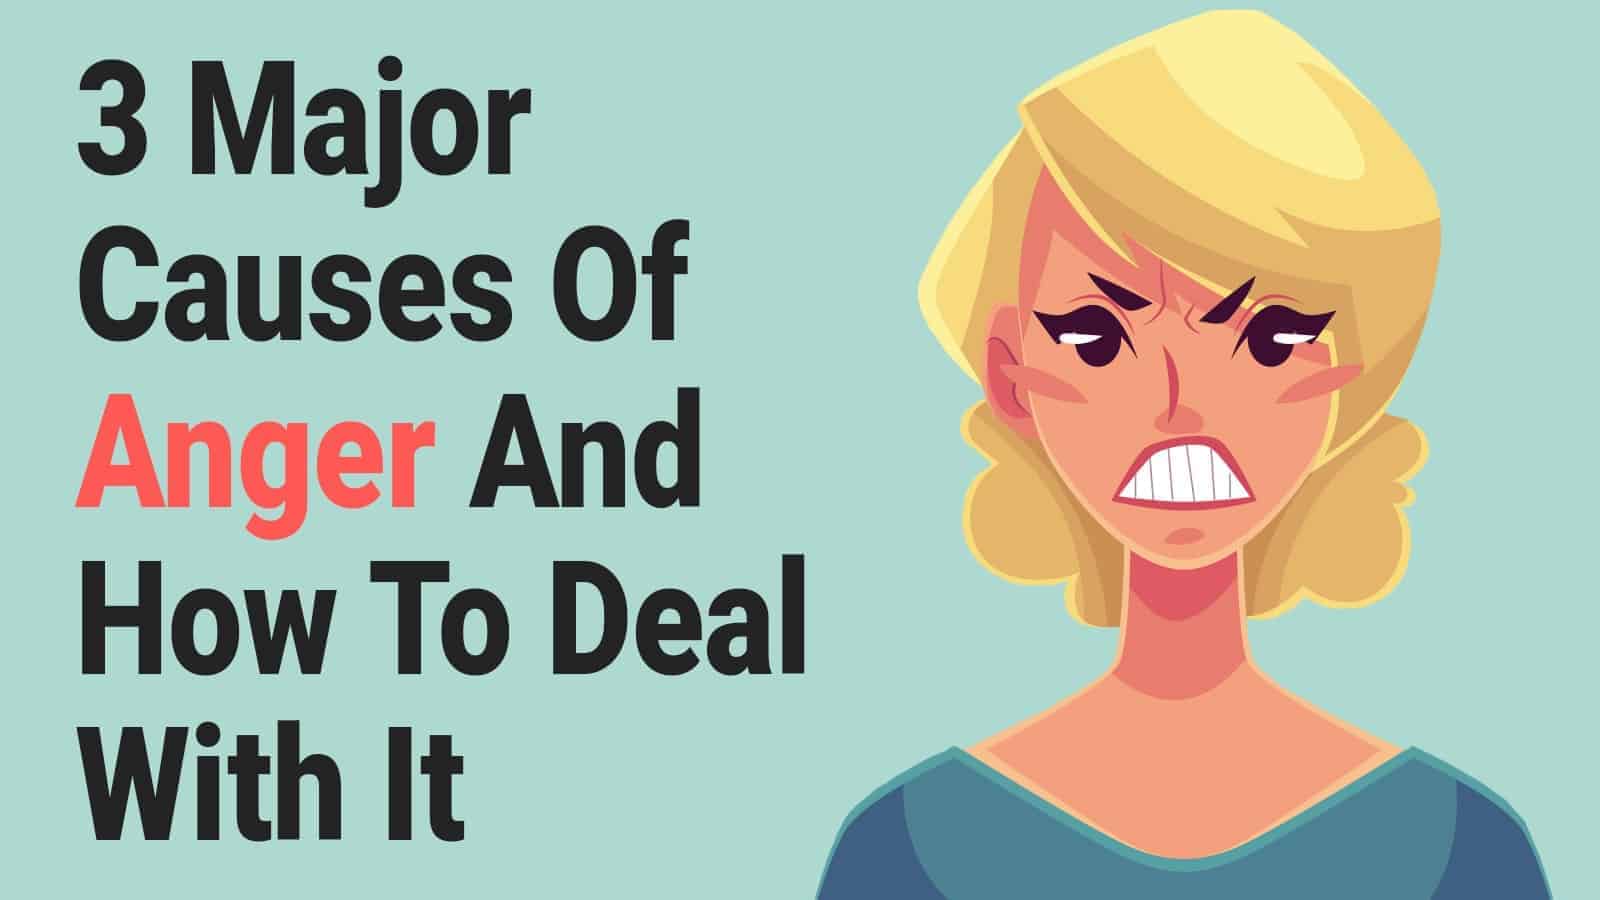 3 Major Causes Of Anger And How To Deal With It